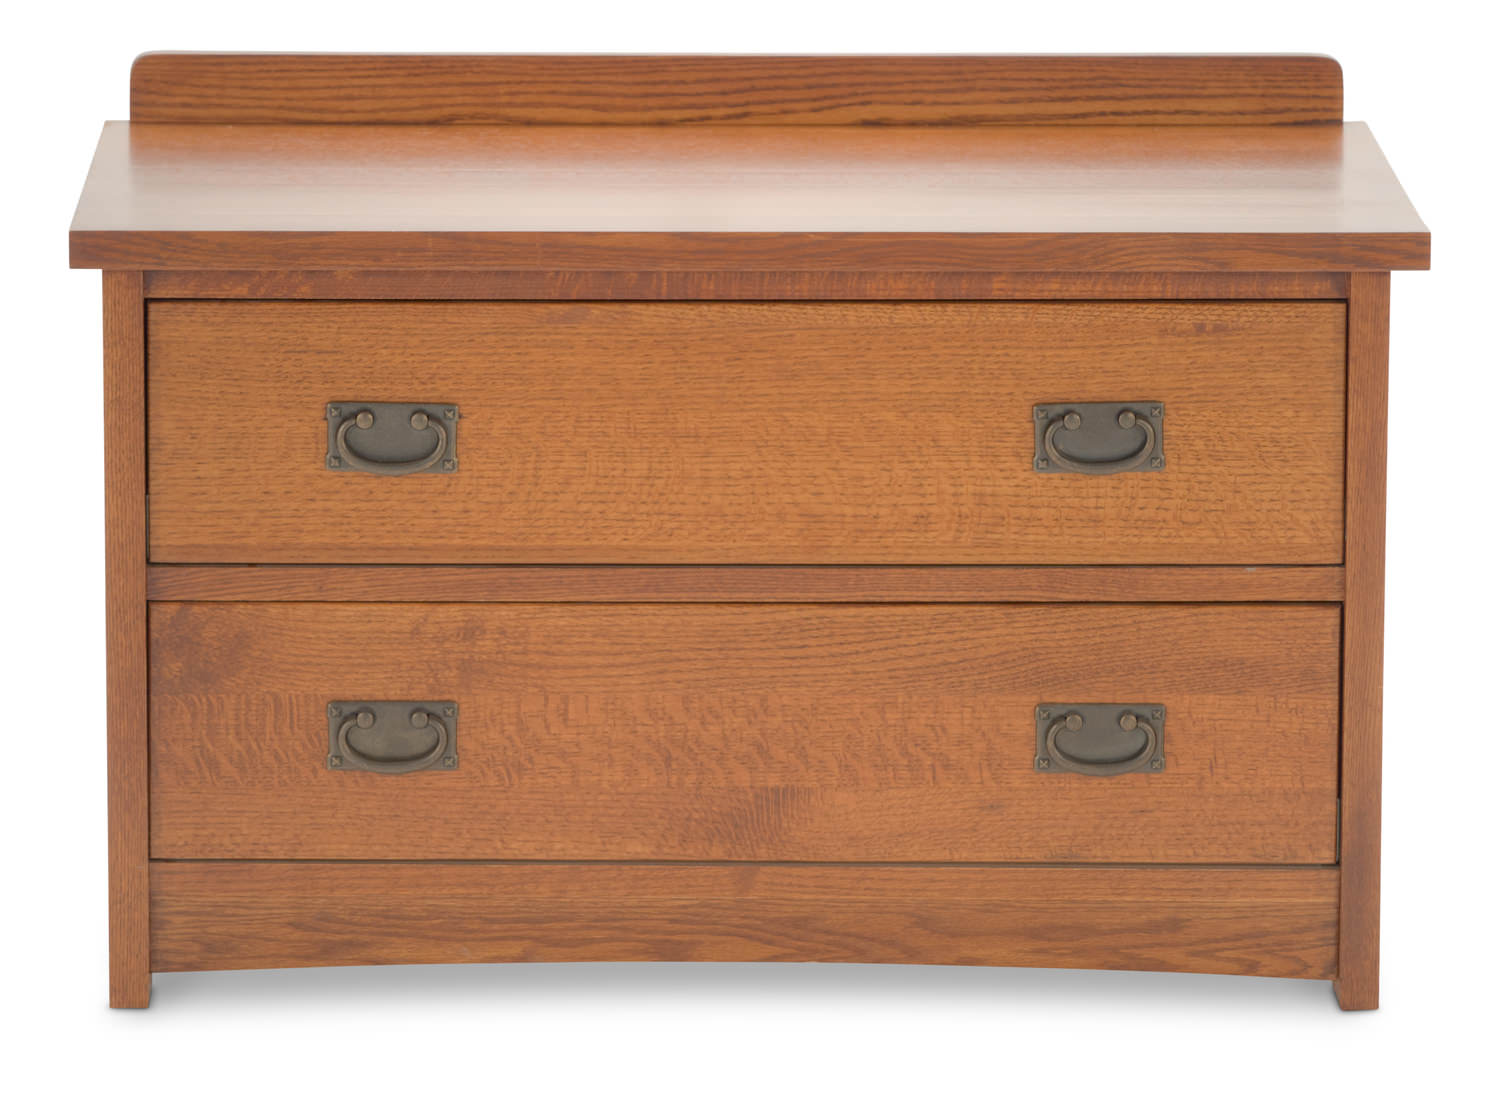 Witmer American Mission II Blanket Chest